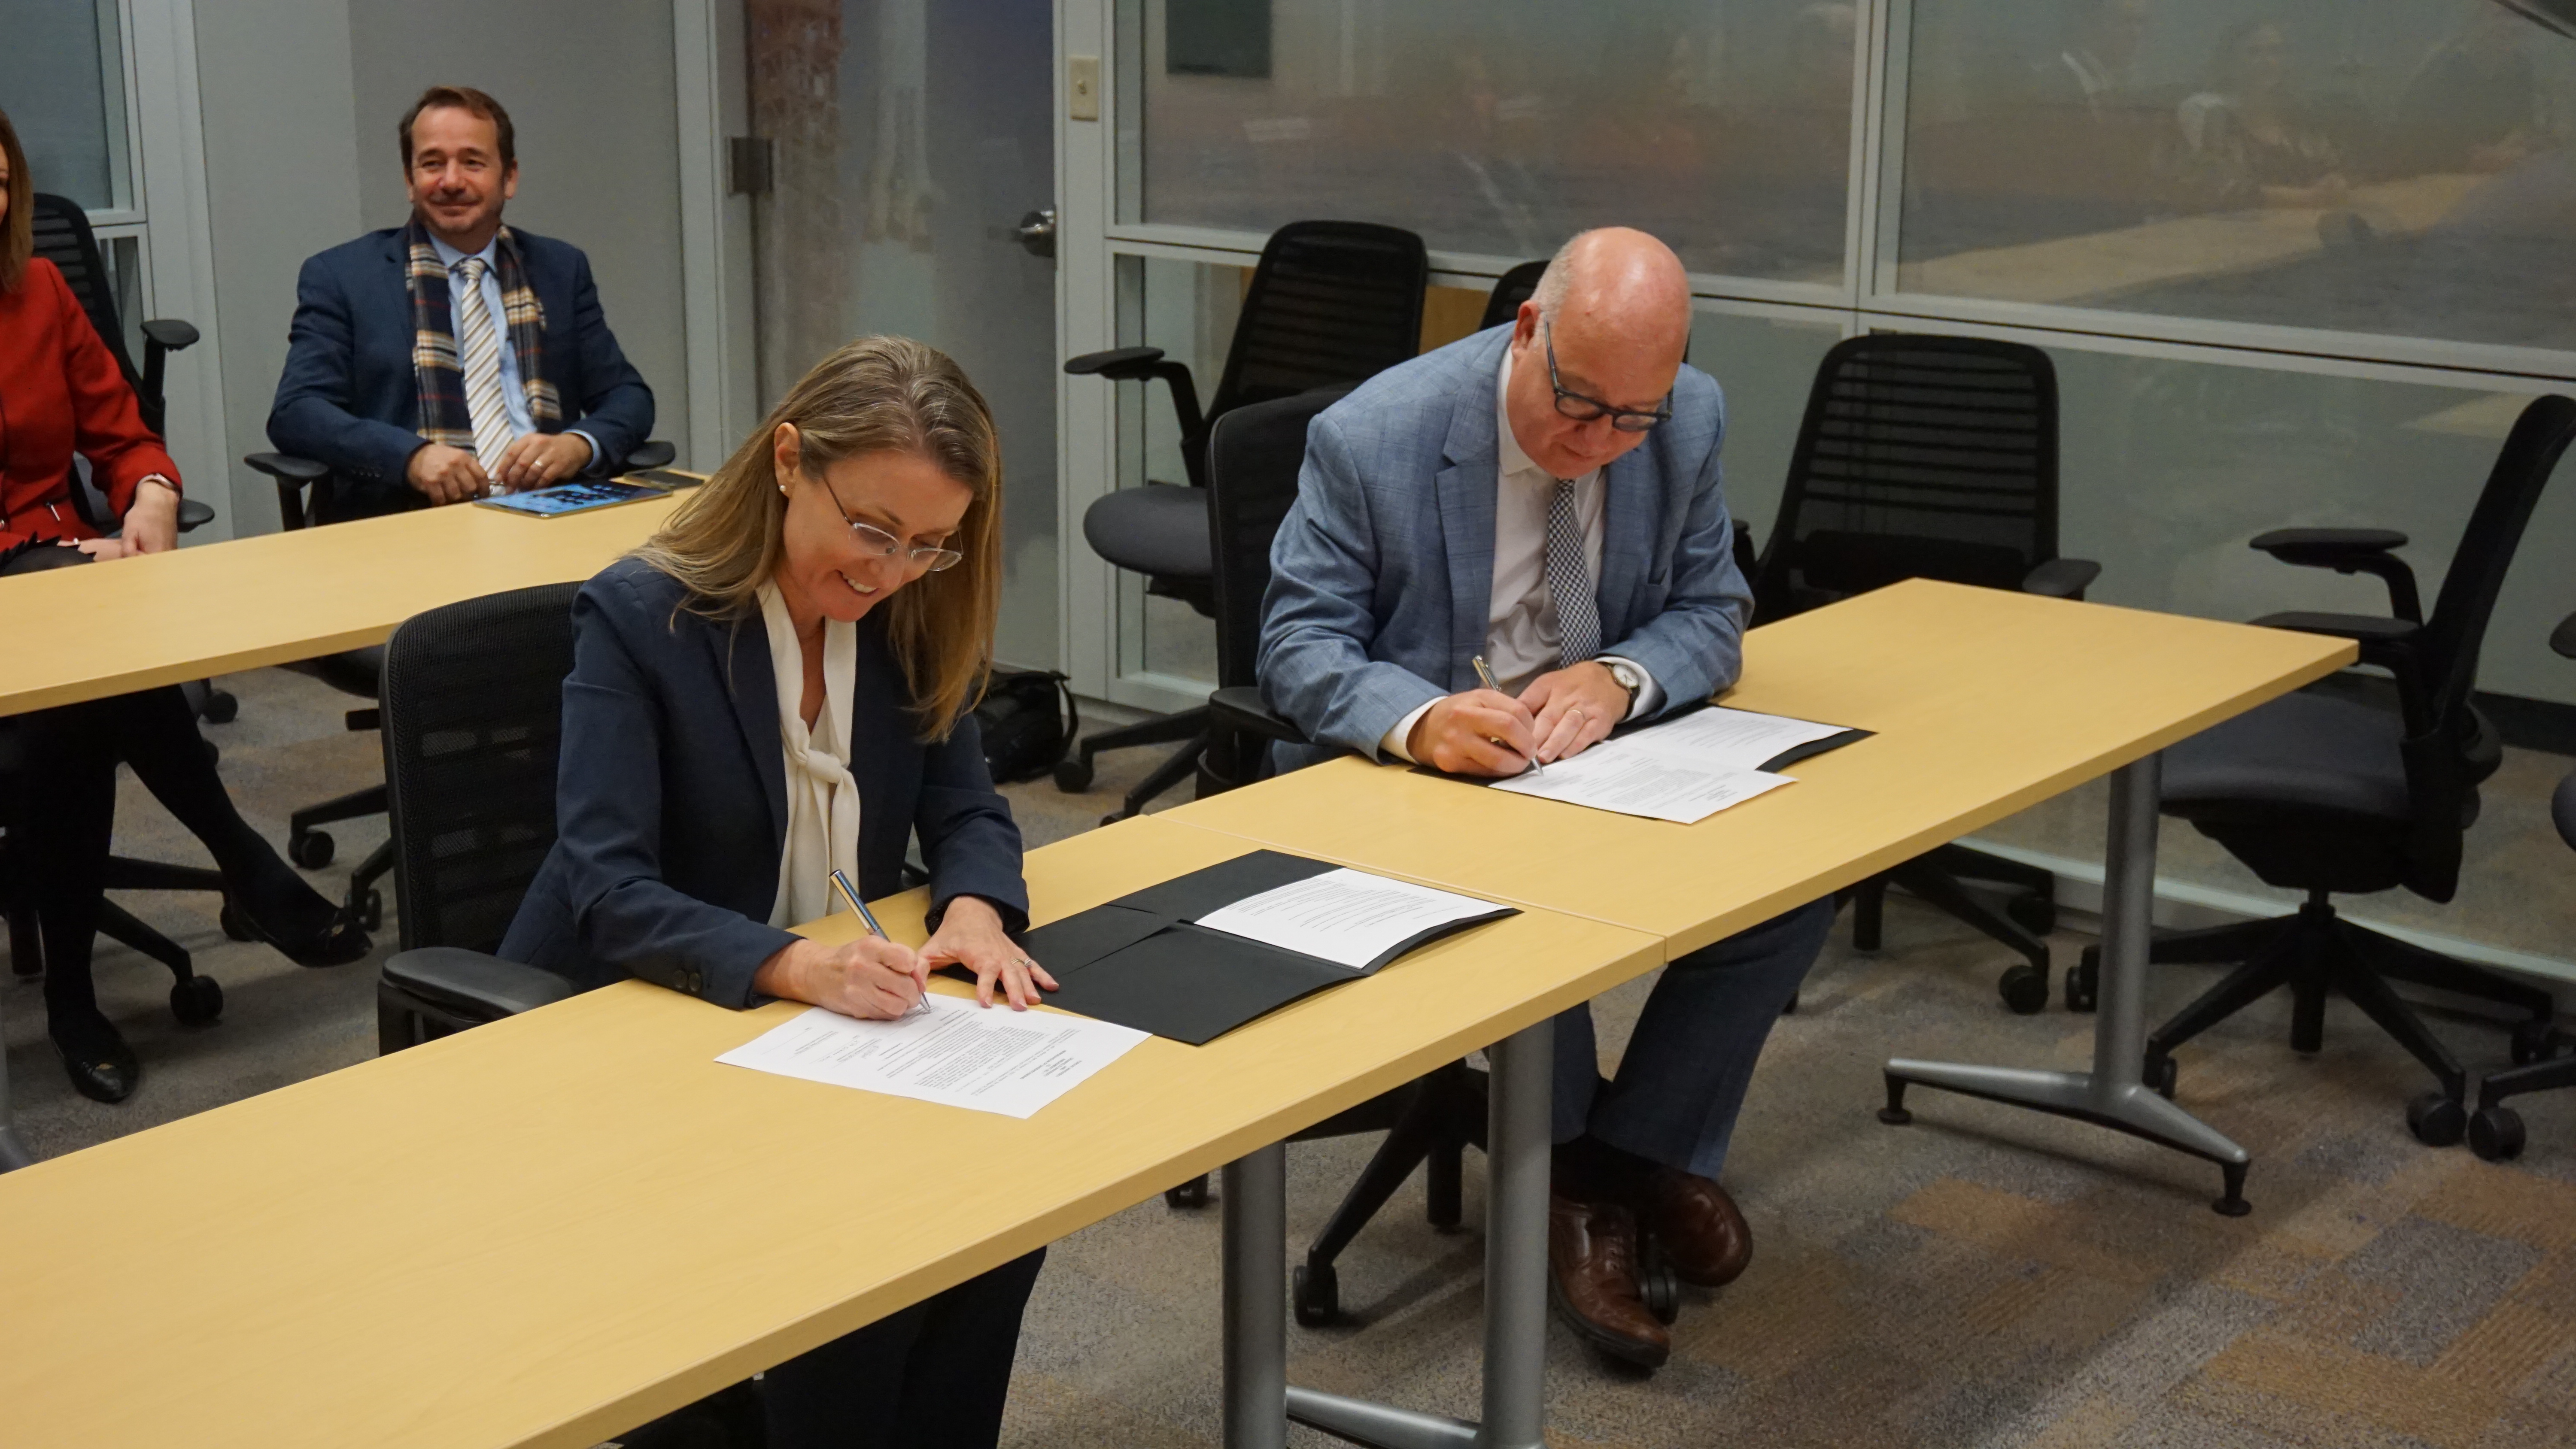 Theresa Mayer, executive vice president for research and partnerships at Purdue, and Simon Pollard, pro-vice-chancellor international at Cranfield University, sign the MOU amendment to expand the defense education and research partnership between Purdue and Cranfield